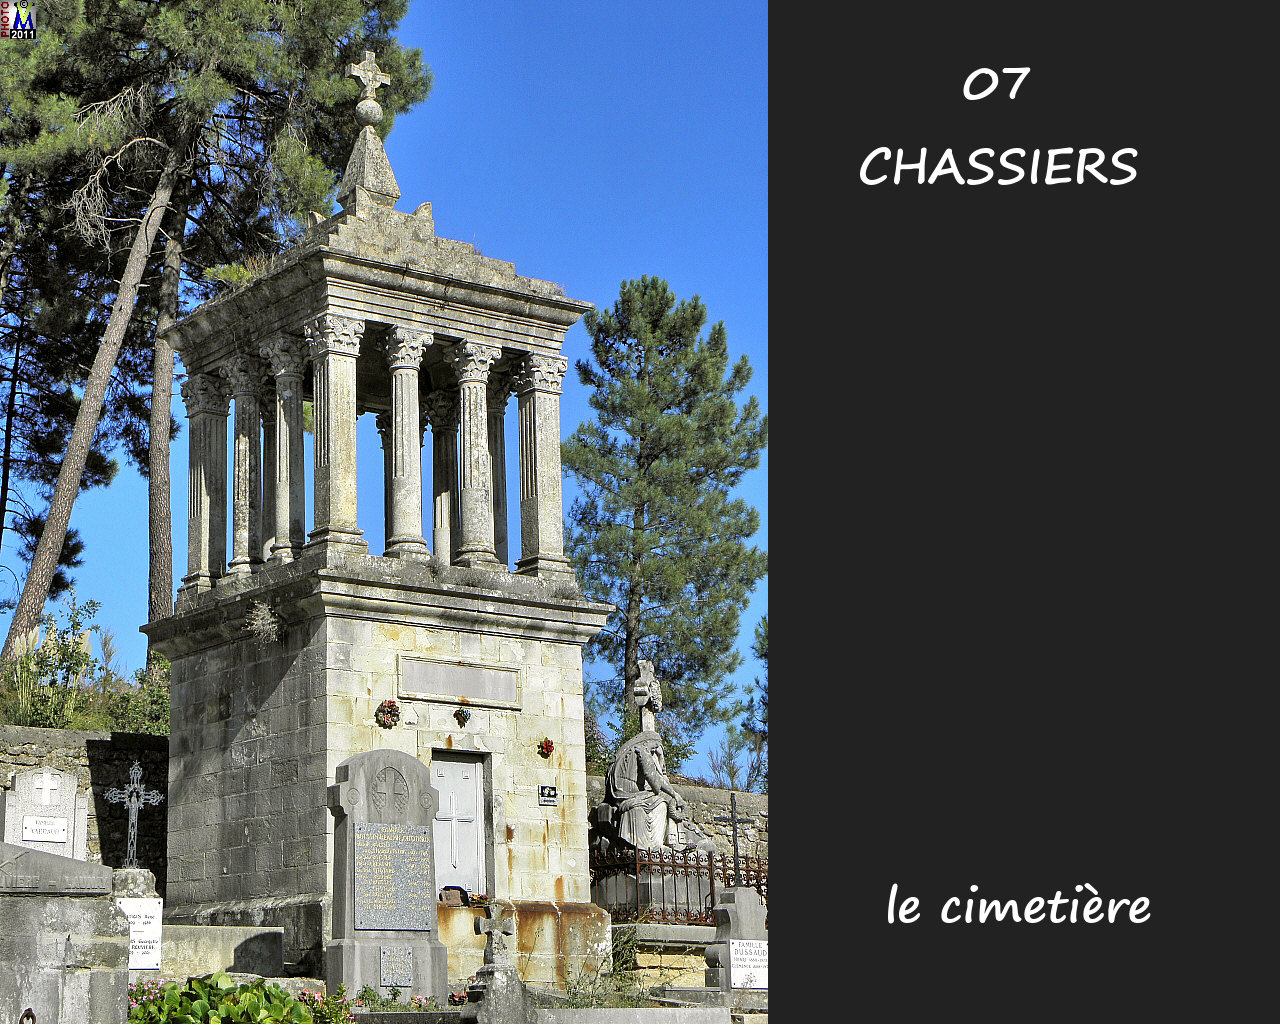 07CHASSIERS_cimetiere_100.jpg